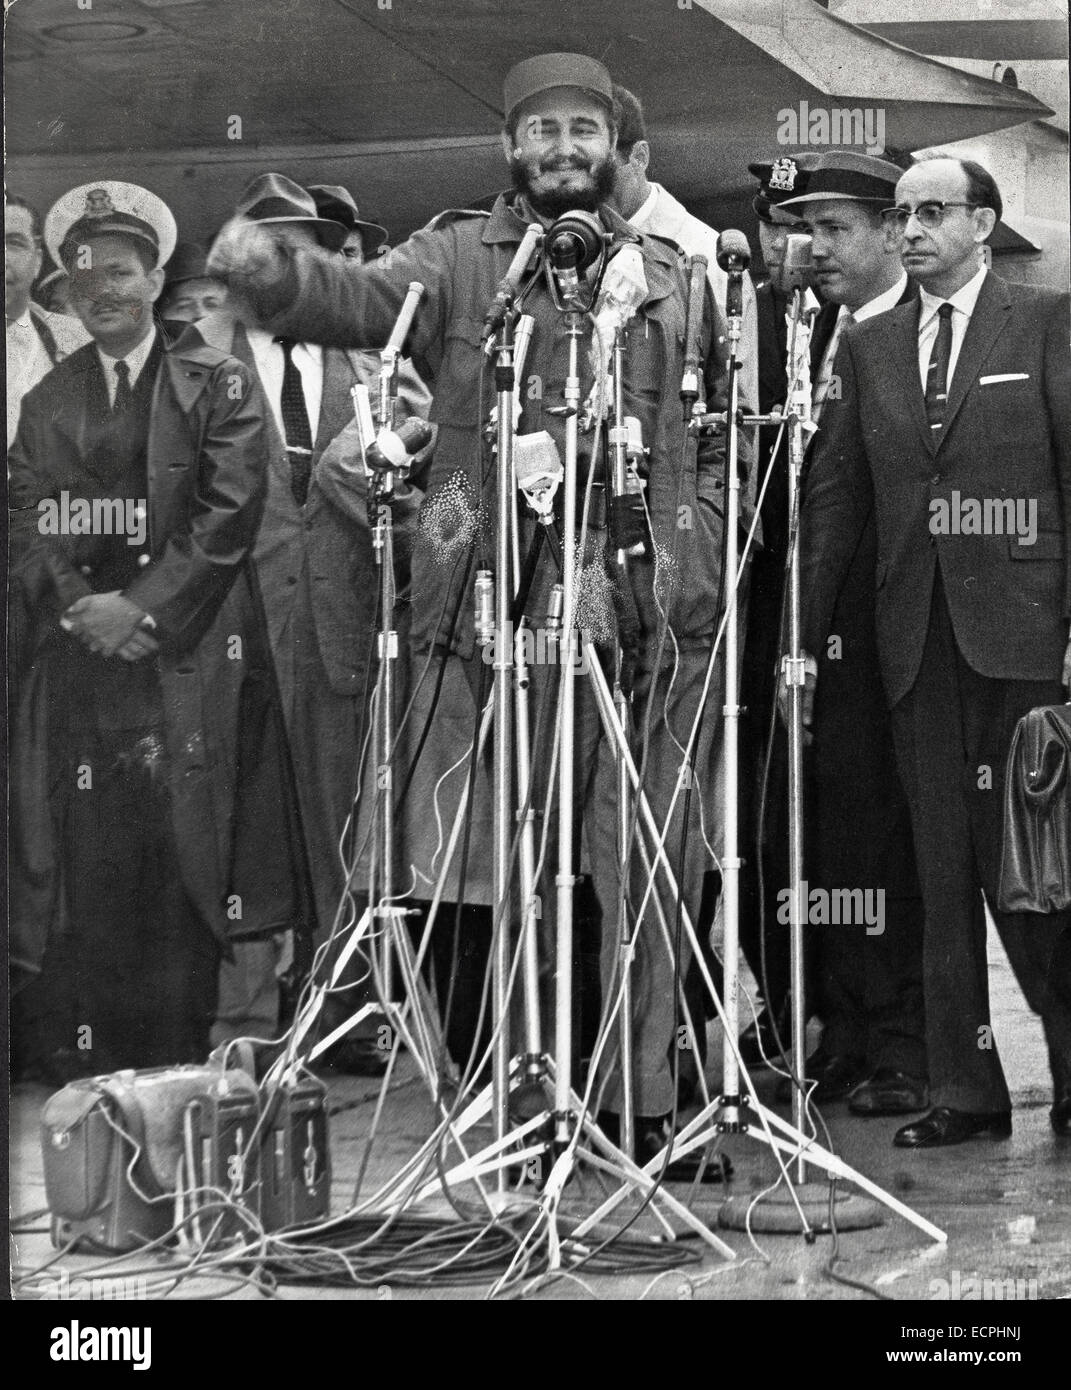 New York, NY, USA. 21st Sep, 1960. FIDEL CASTRO (born August 13, 1926), ruler of Cuba since 1959, when, leading the 26th of July Movement, he overthrew the regime of Fulgencio Batista. In the years that followed he oversaw the transformation of Cuba into the first Communist state in the Western Hemisphere. PICTURED: Castro makes a speech on arrival at International Airport NY. © KEYSTONE Pictures USA/ZUMAPRESS.com/Alamy Live News Stock Photo